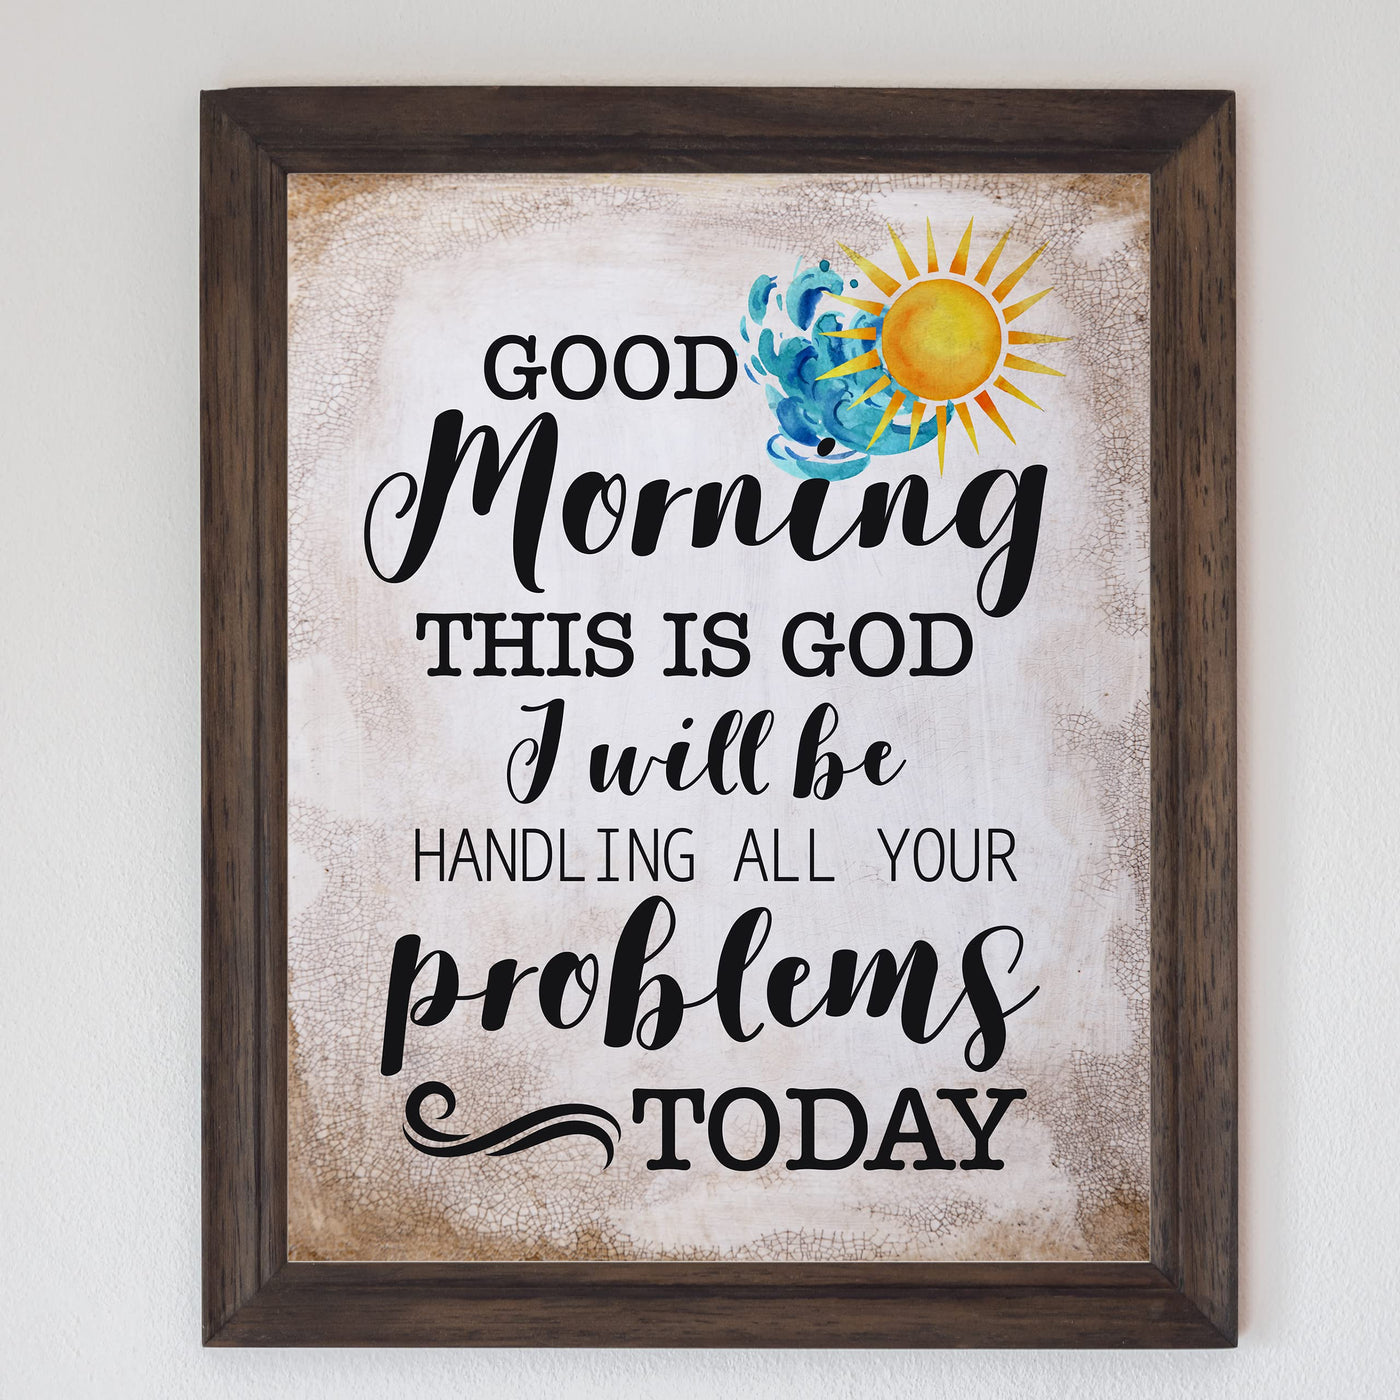 God Will Be Handling All Your Problems Today Inspirational Wall Art Decor -8 x 10" Typographic Christian Print -Ready to Frame. Religious Decor for Home-Office-Church-School. Great Gift of Faith!